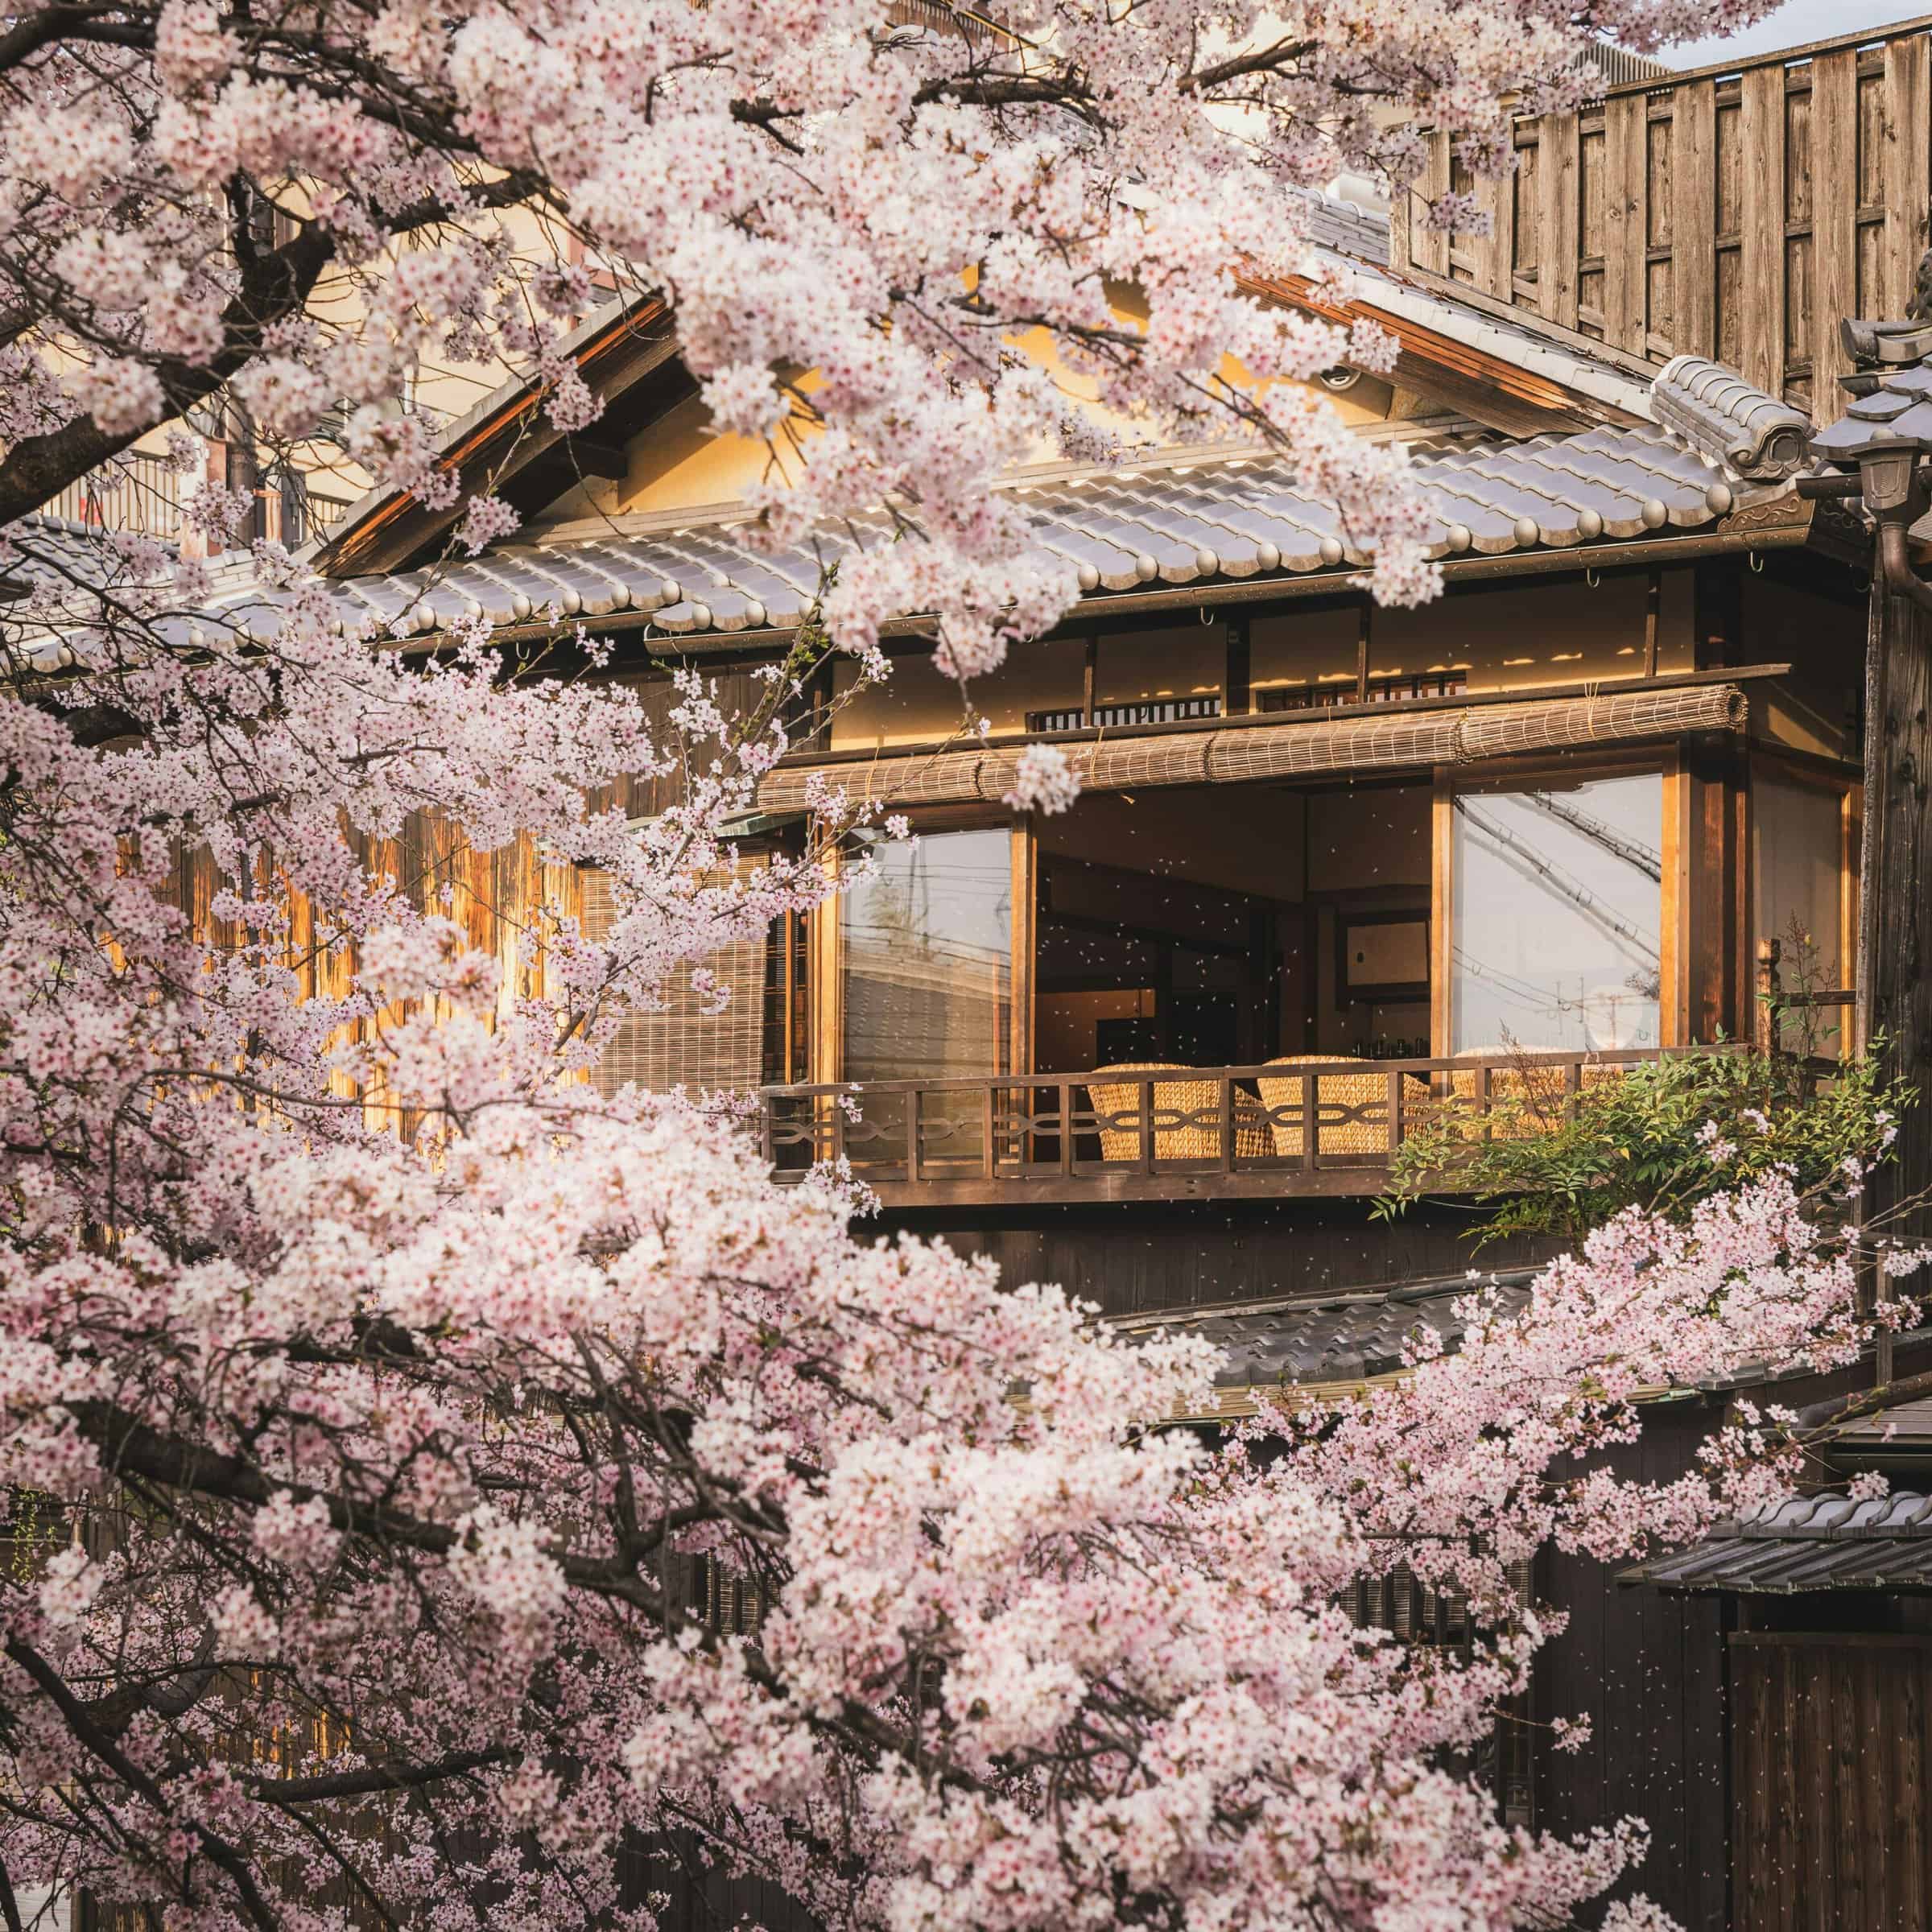 Cherry blossom tree in full bloom outside a traditional Japanese building in Kyoto, Japan. 